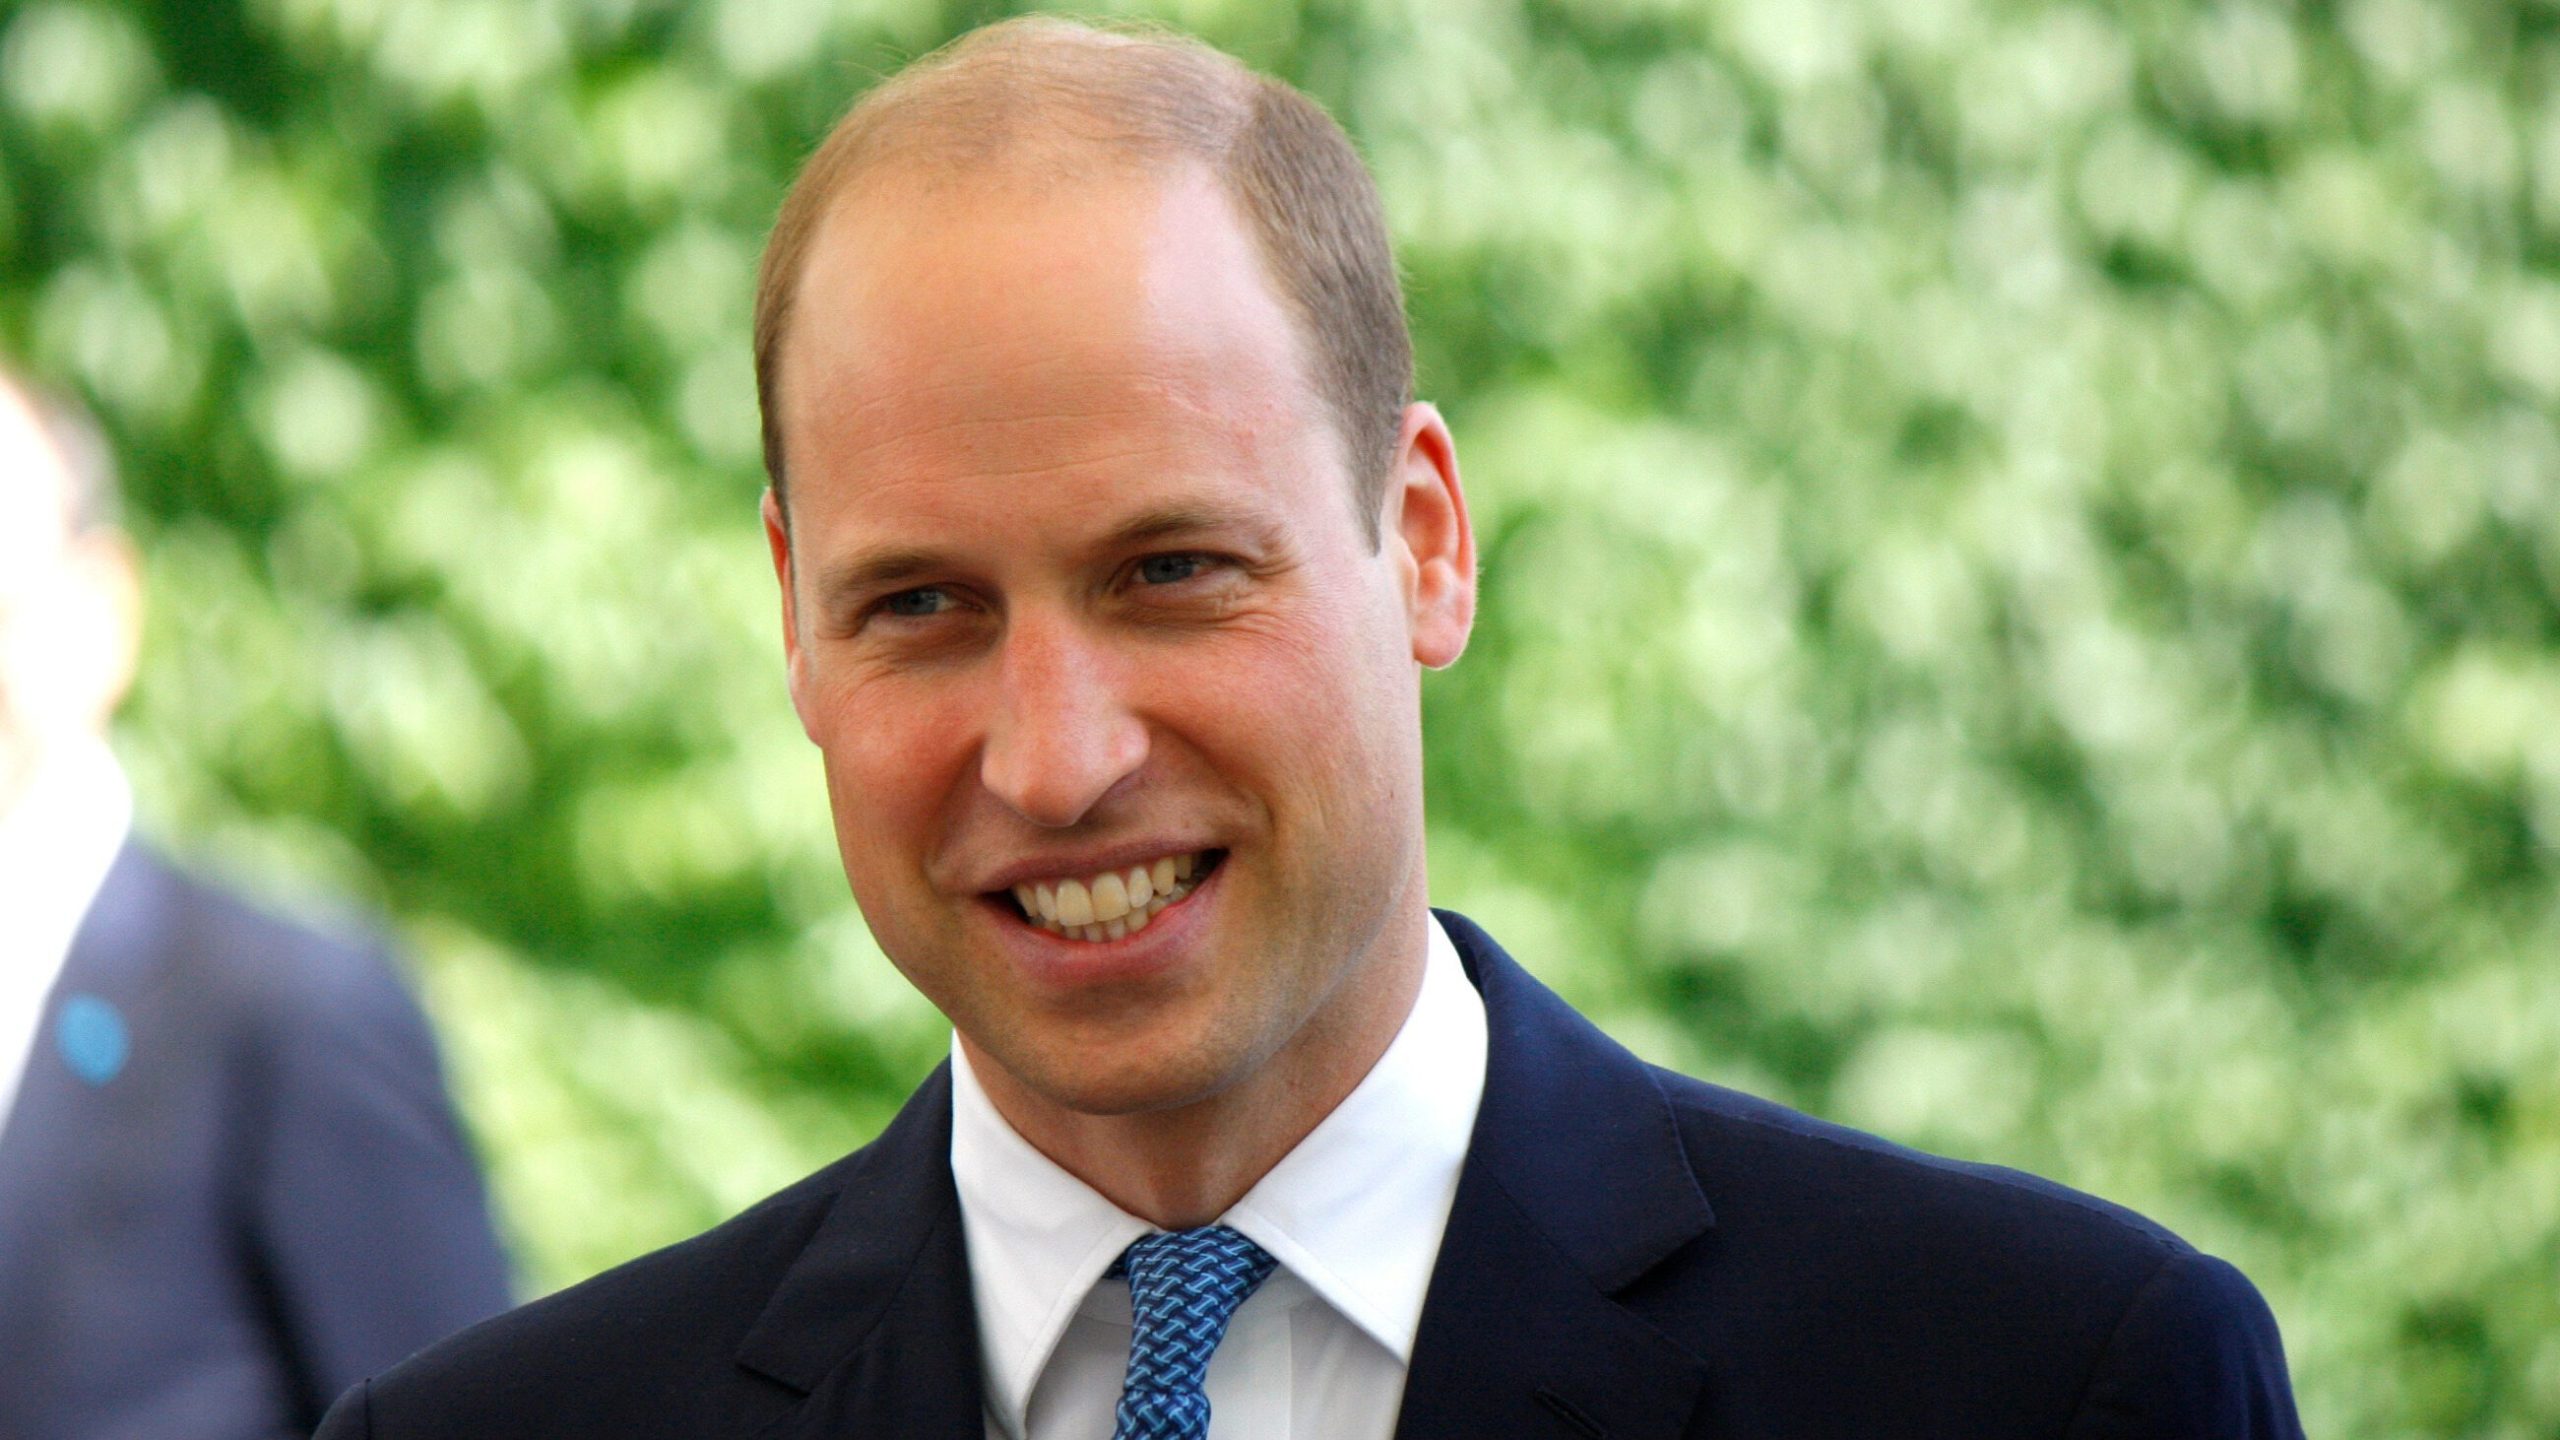 Prince William's statement.  “He rarely speaks on such controversial issues.”